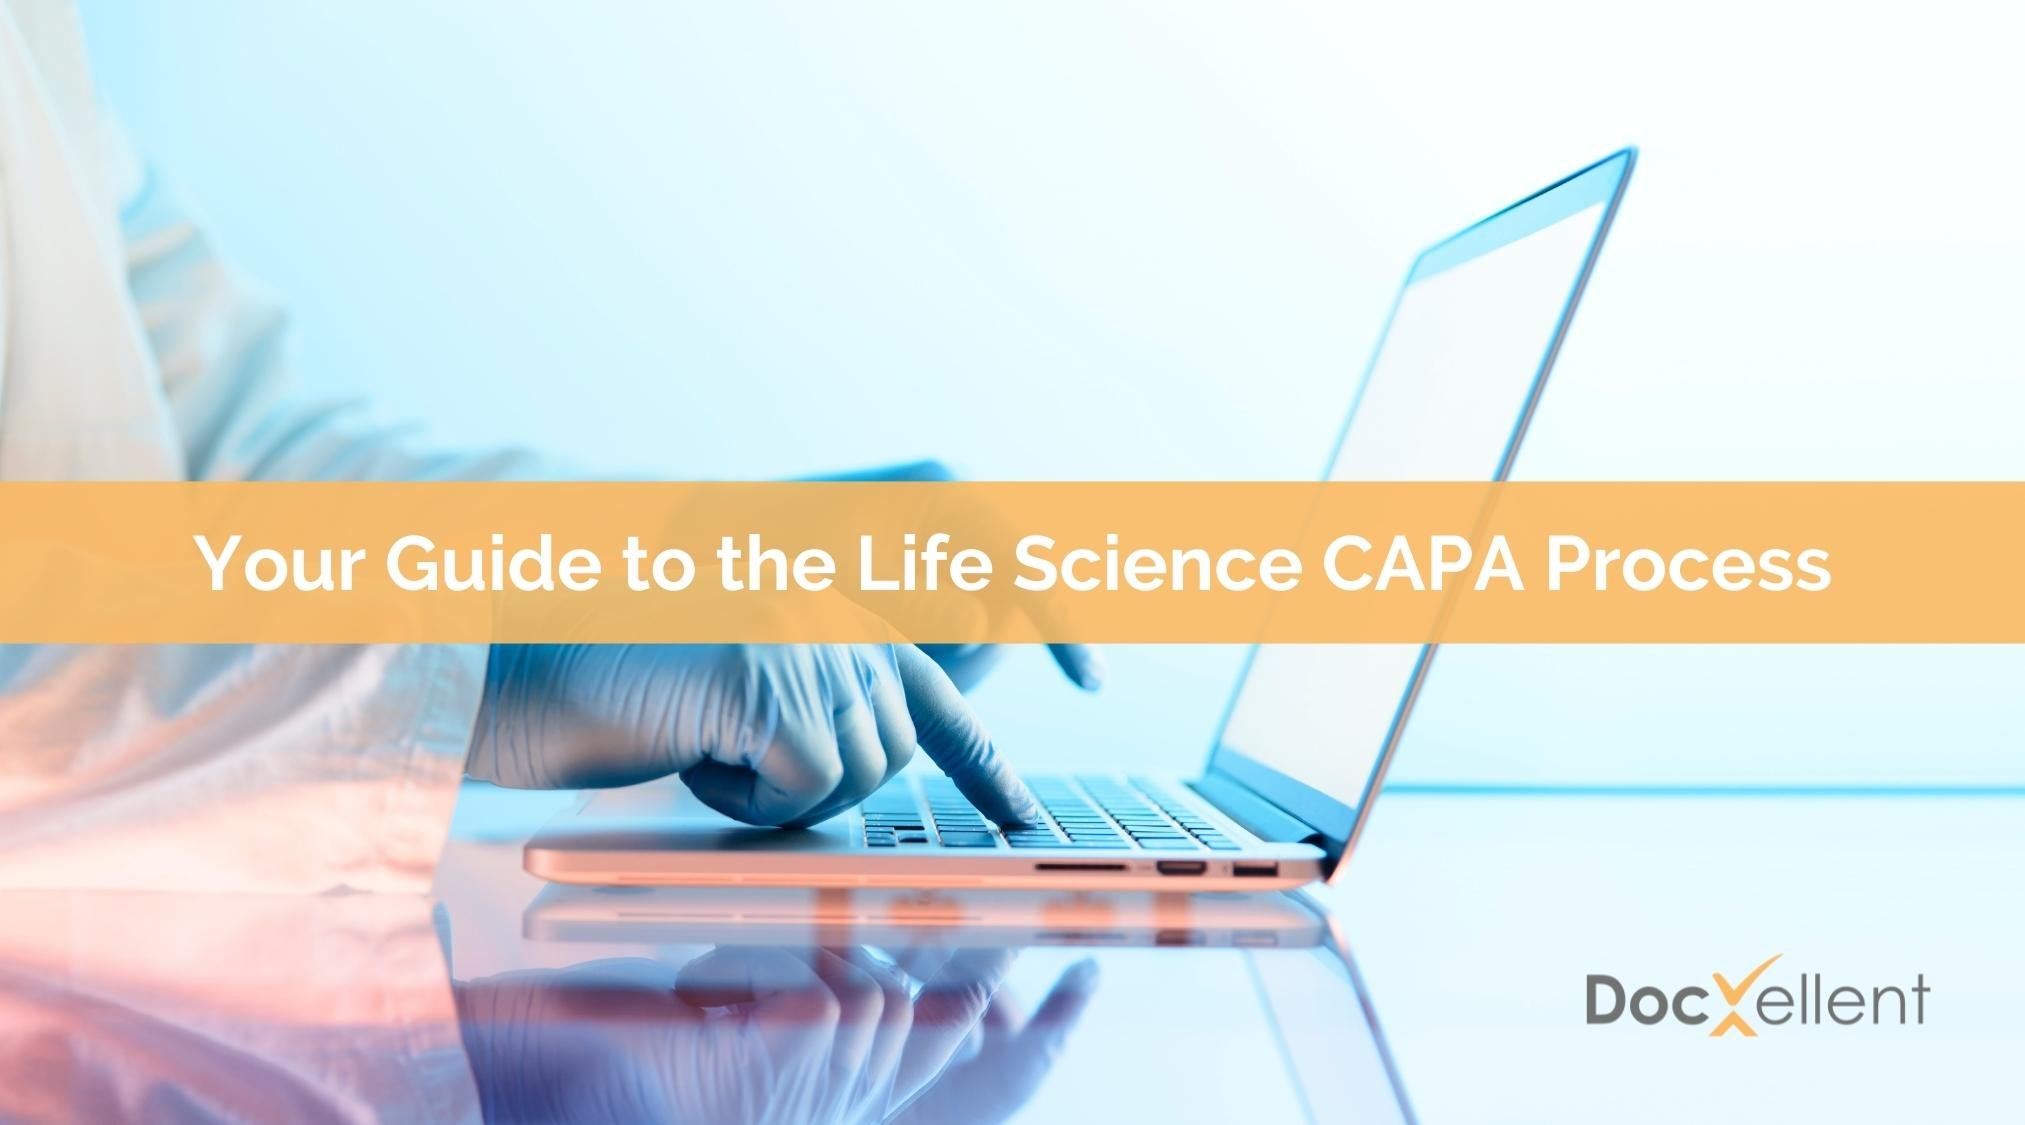 Your Guide to the Life Science CAPA Process